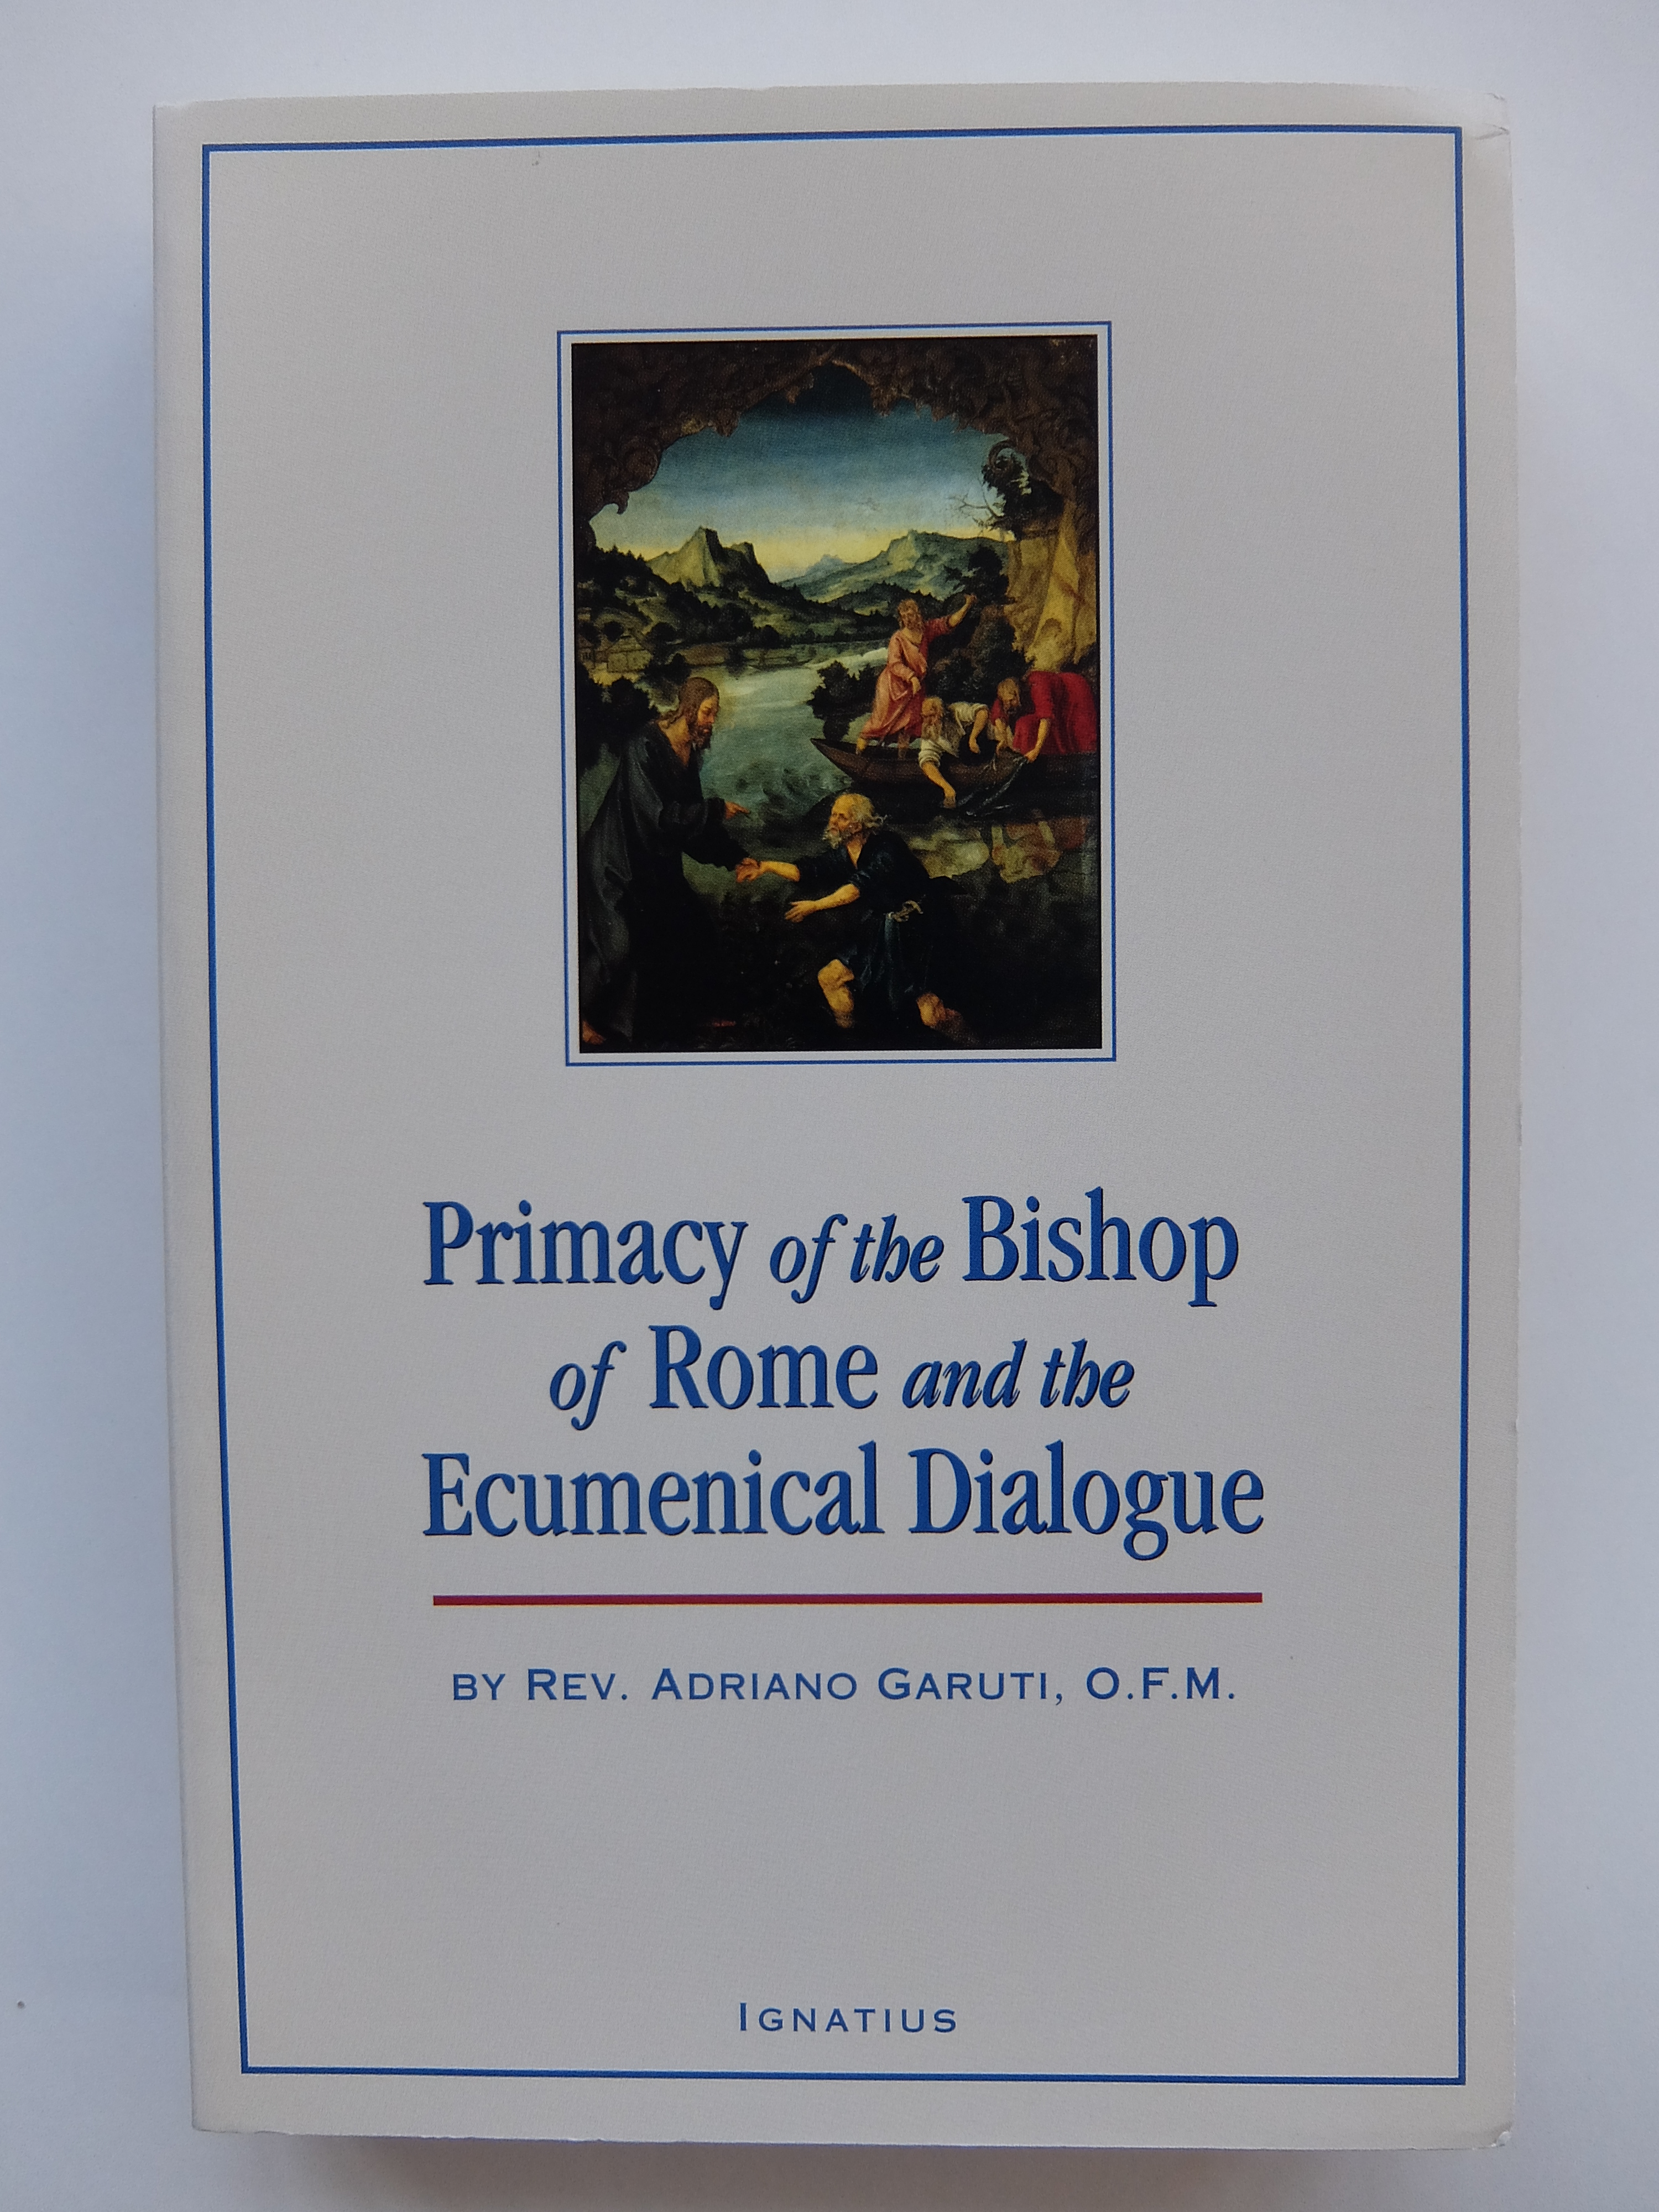 Primacy of the Bishop of Rome and the Ecumenical Dialogue Image